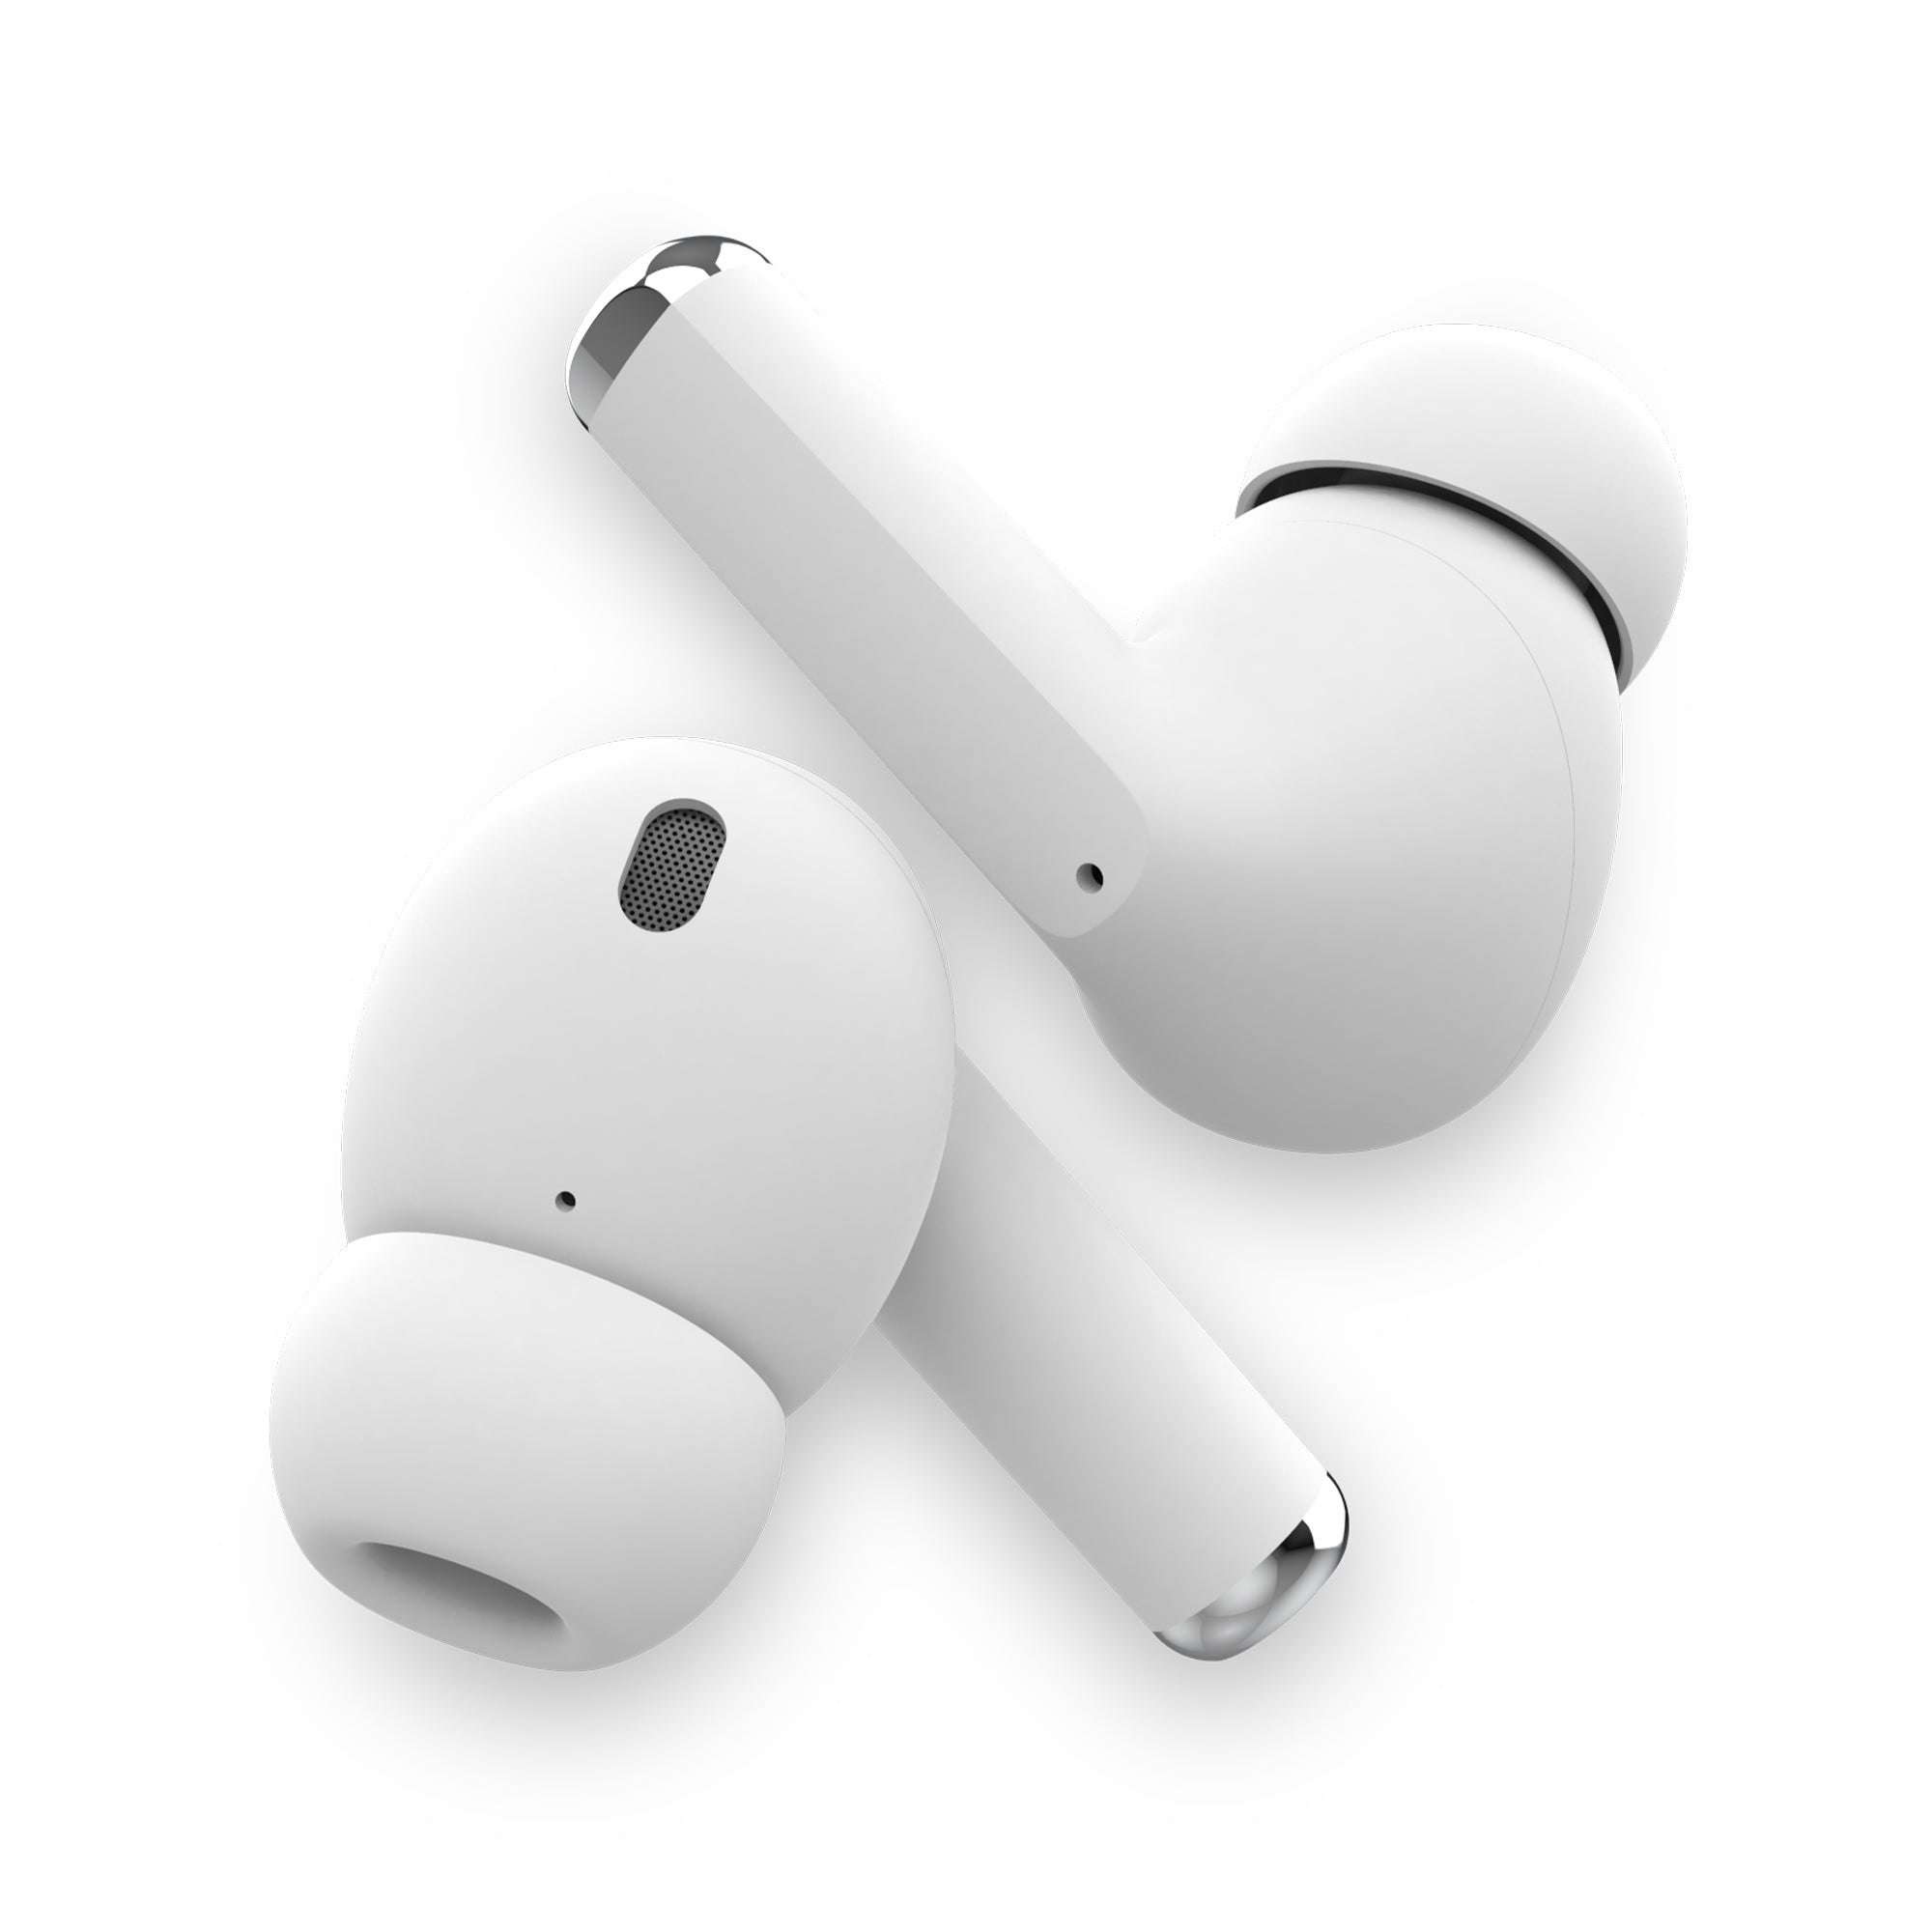 Buy TecHouse Airpods Pro/Earbuds with Touch Sensor, TWS Wireless Bluetooth  Connectivity with Lightening Cable Compatible for Both Android and iOS  Devices (White) l Wireless Charging Case, Bluetooth Airpods, Wireless  Airpods, Earphone, Earbuds